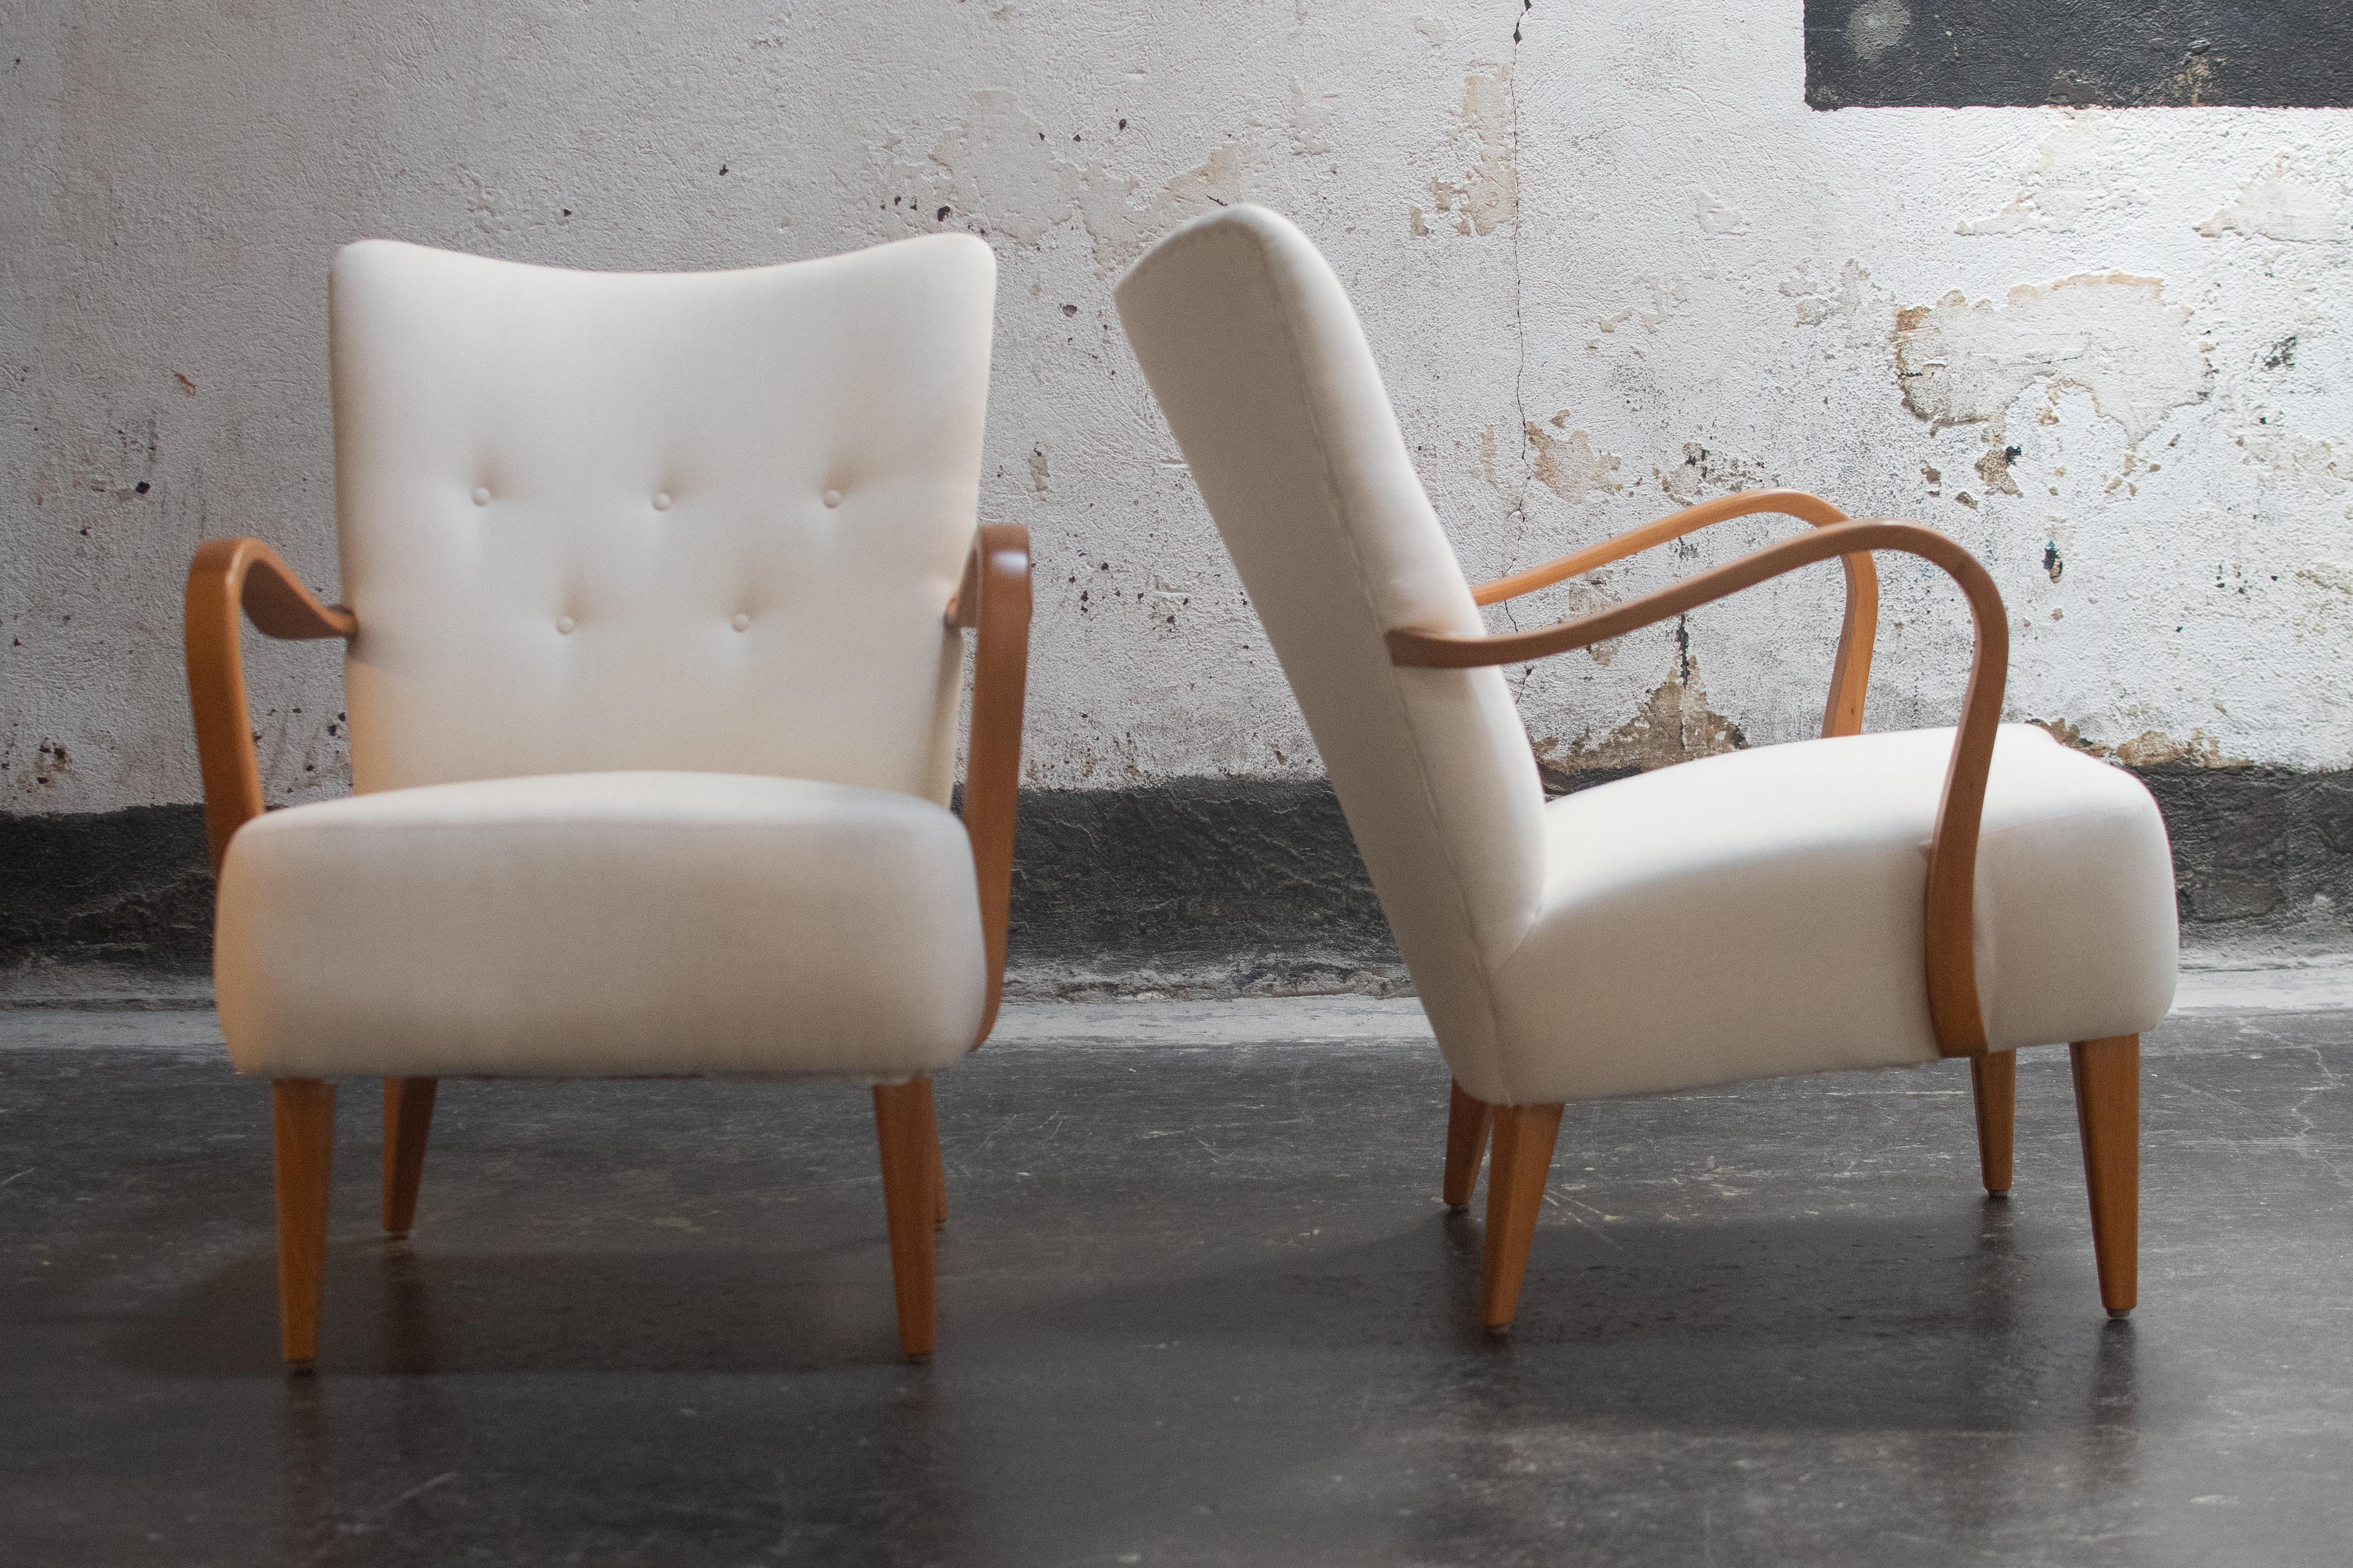 Mid-20th Century Pair of Scandinavian Modern Arm Chairs  For Sale